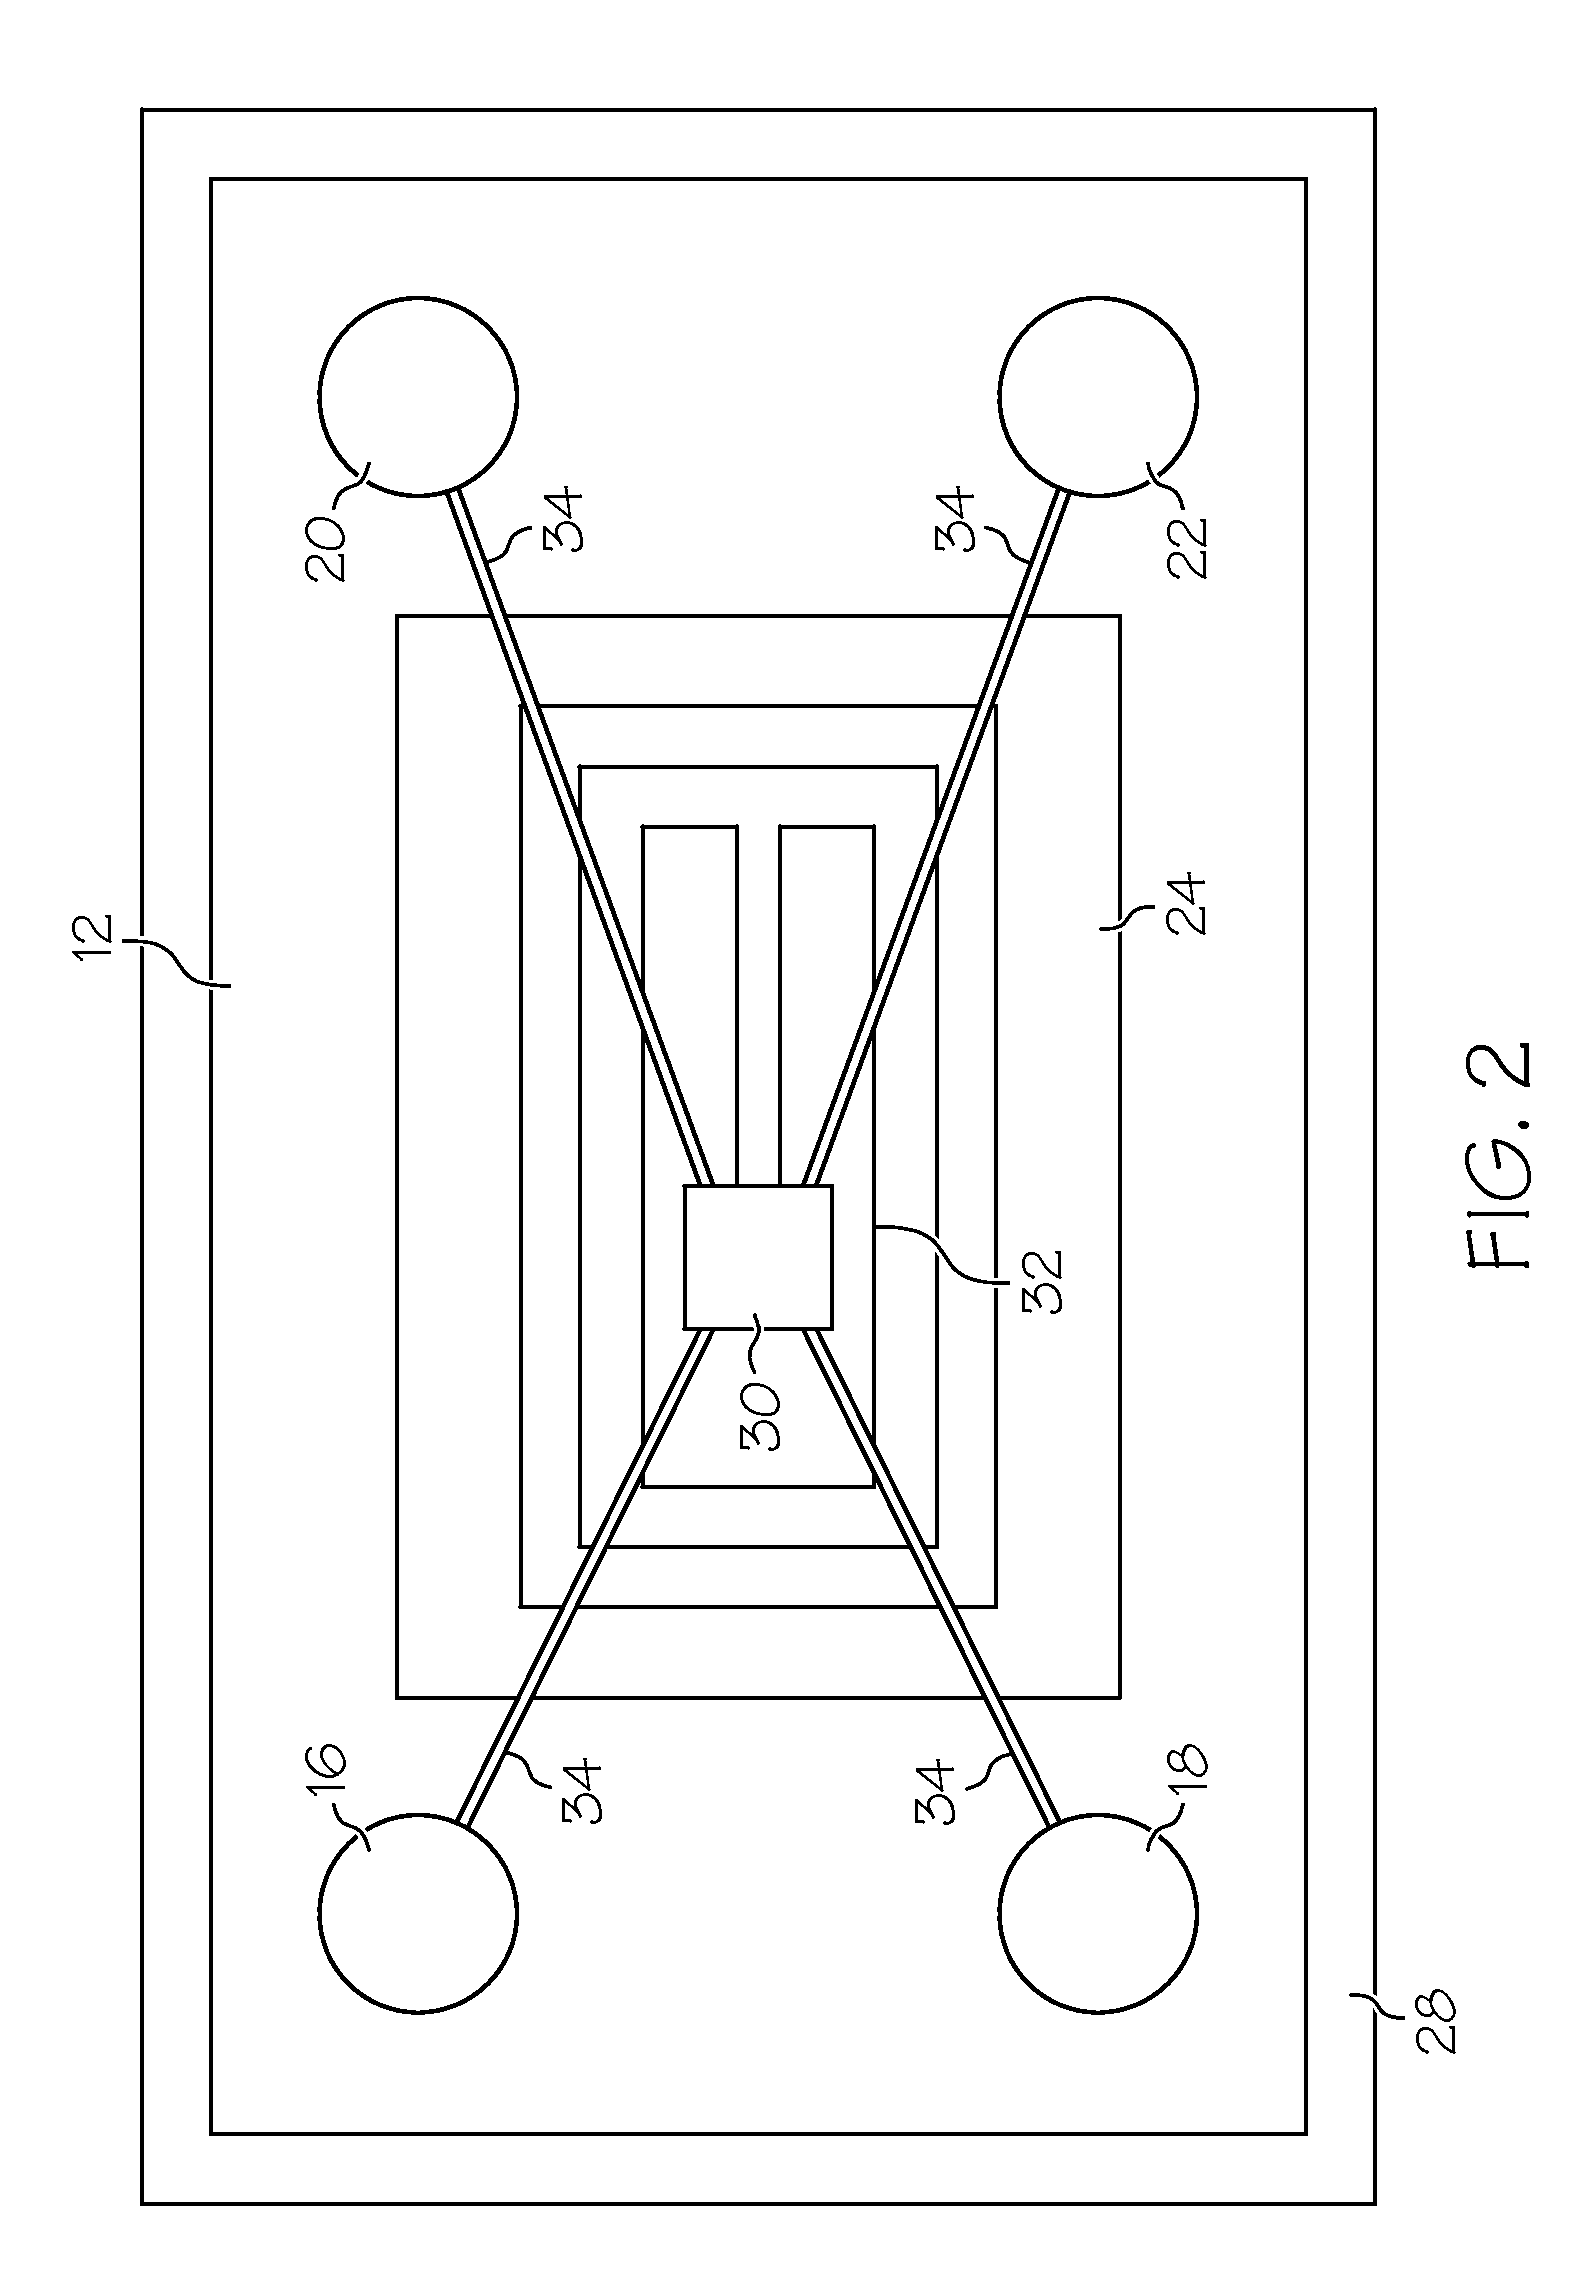 Apparatus and method for monitoring physiological parameters using electrical measurements